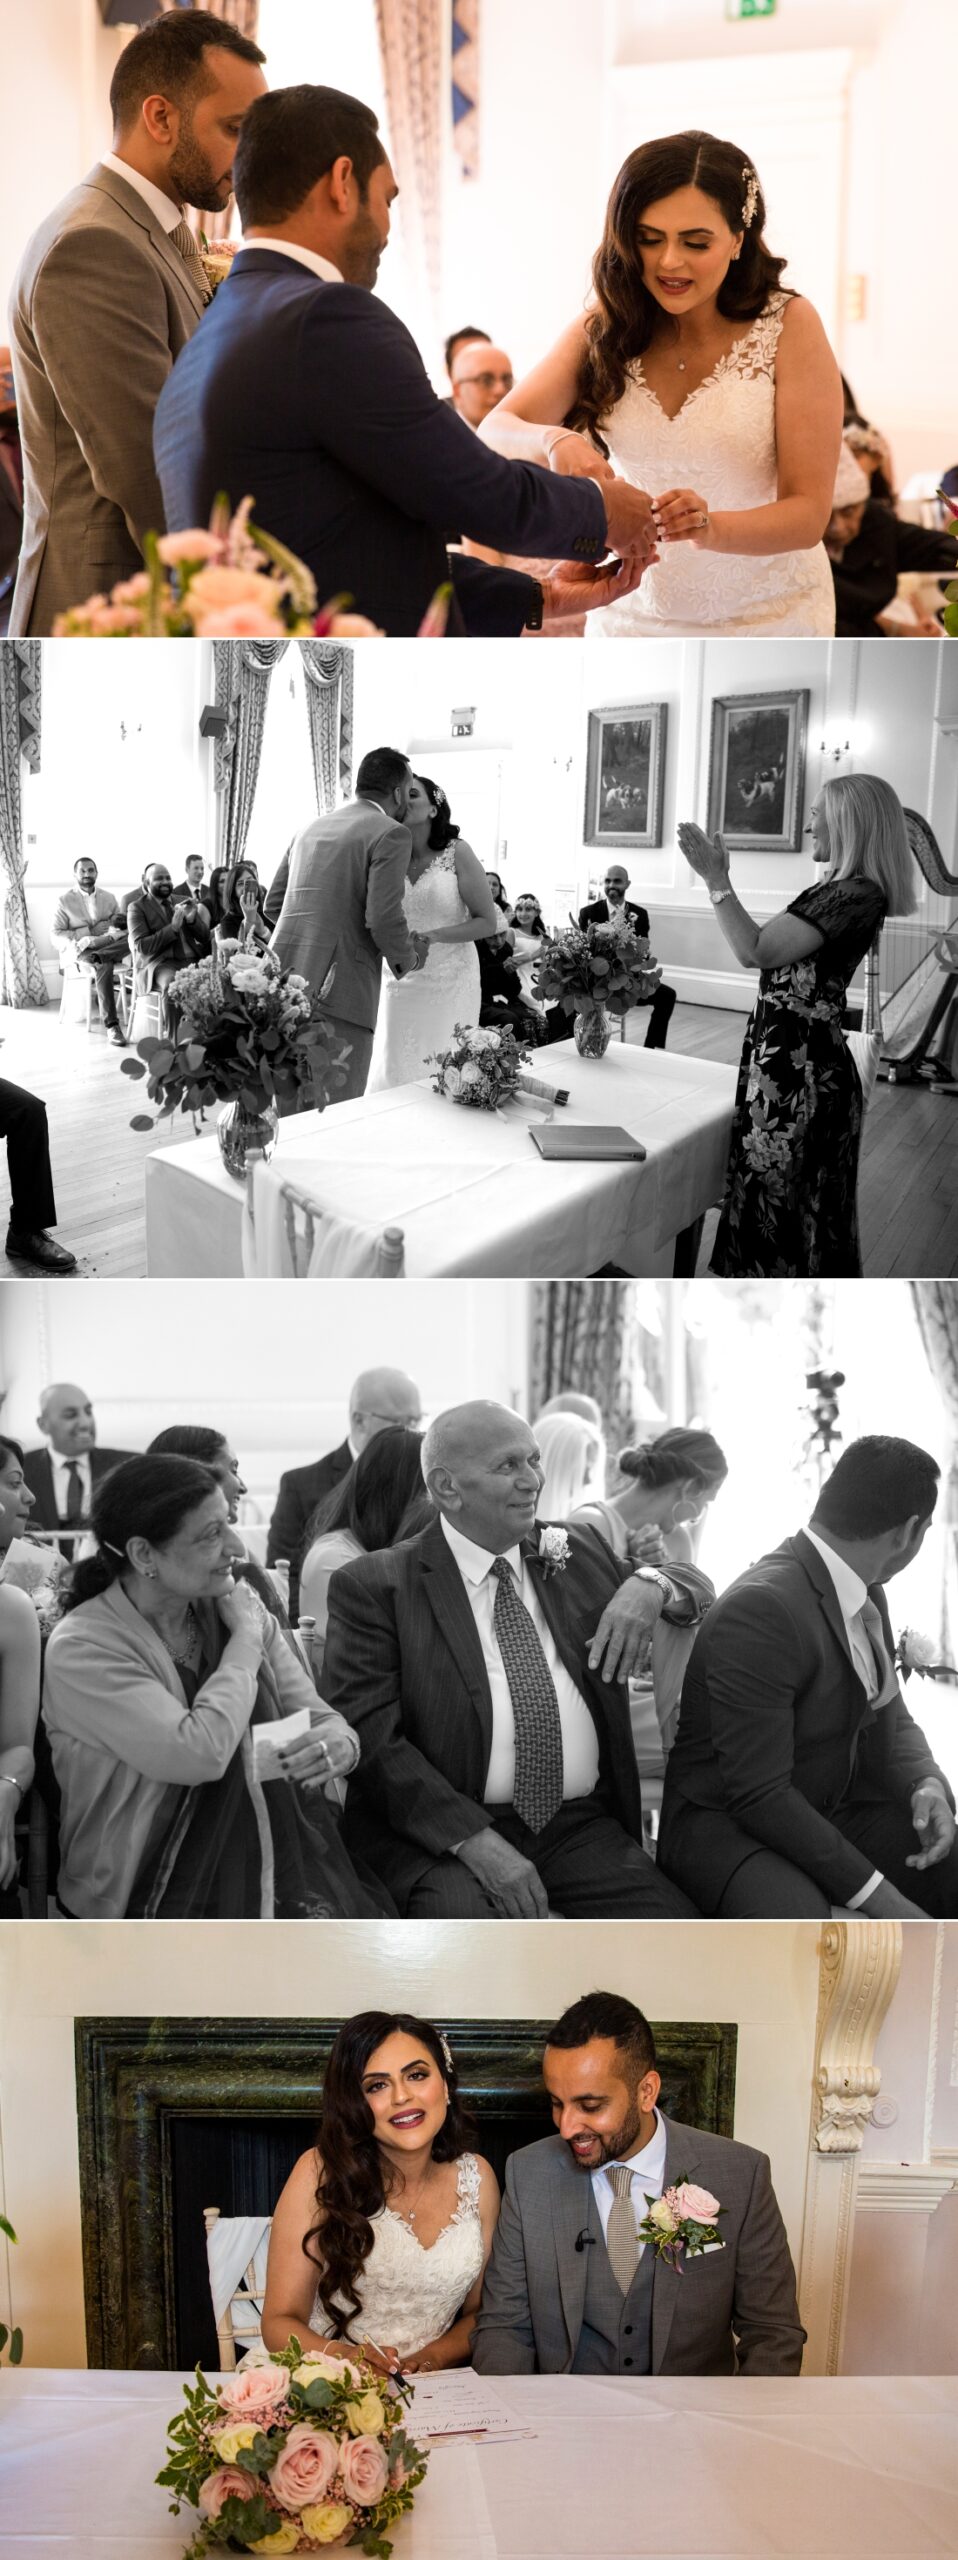 Civil Wedding Photography Videography at Brooksby Hall 5 1 scaled